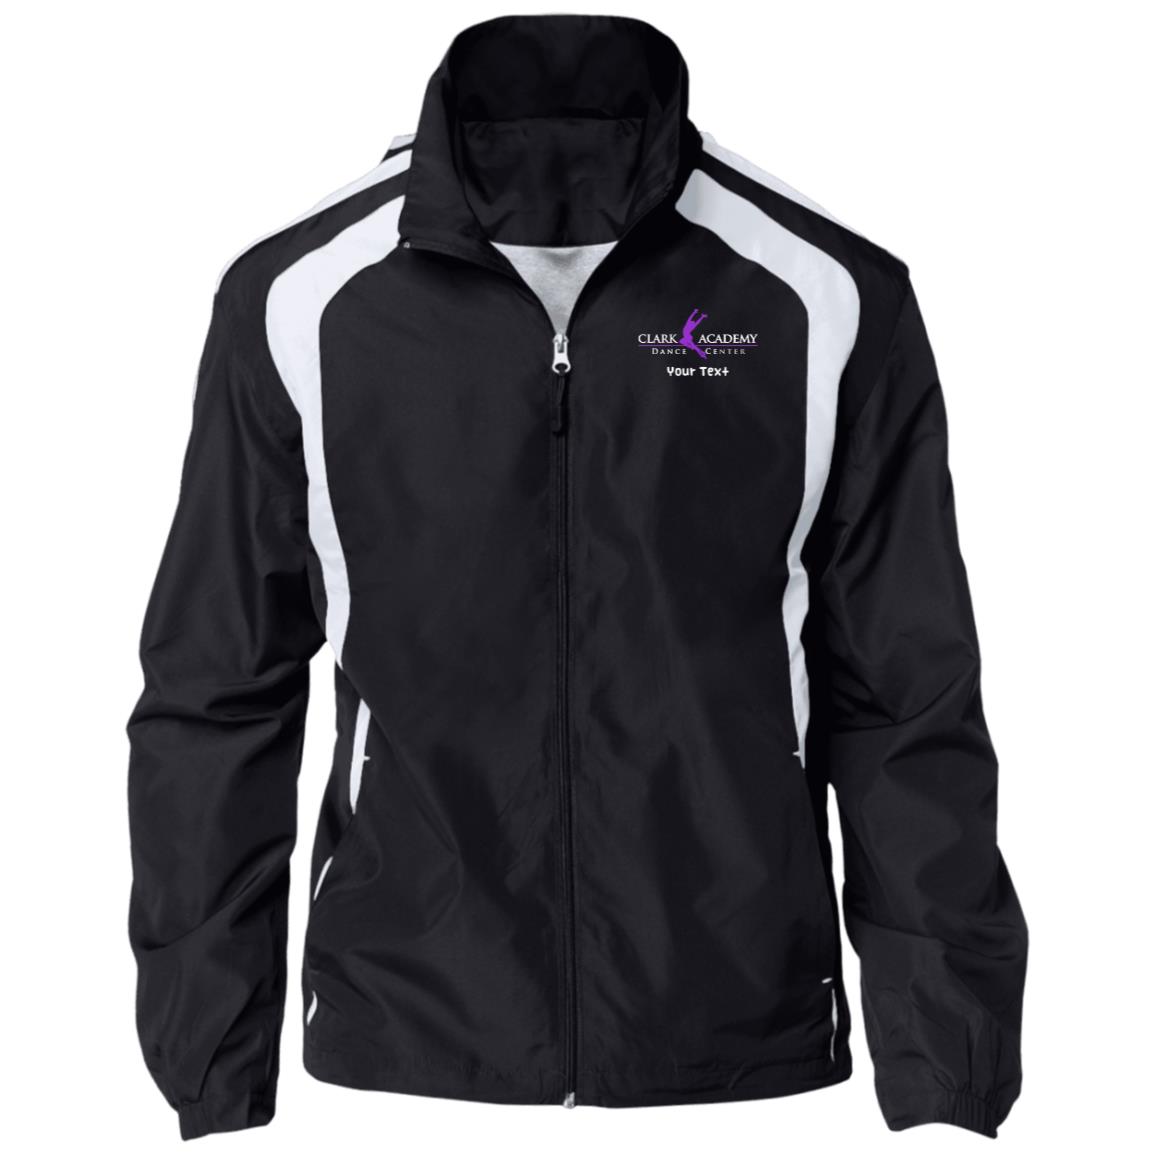 CADC Jersey-Lined Raglan Jacket - With FREE Personalization